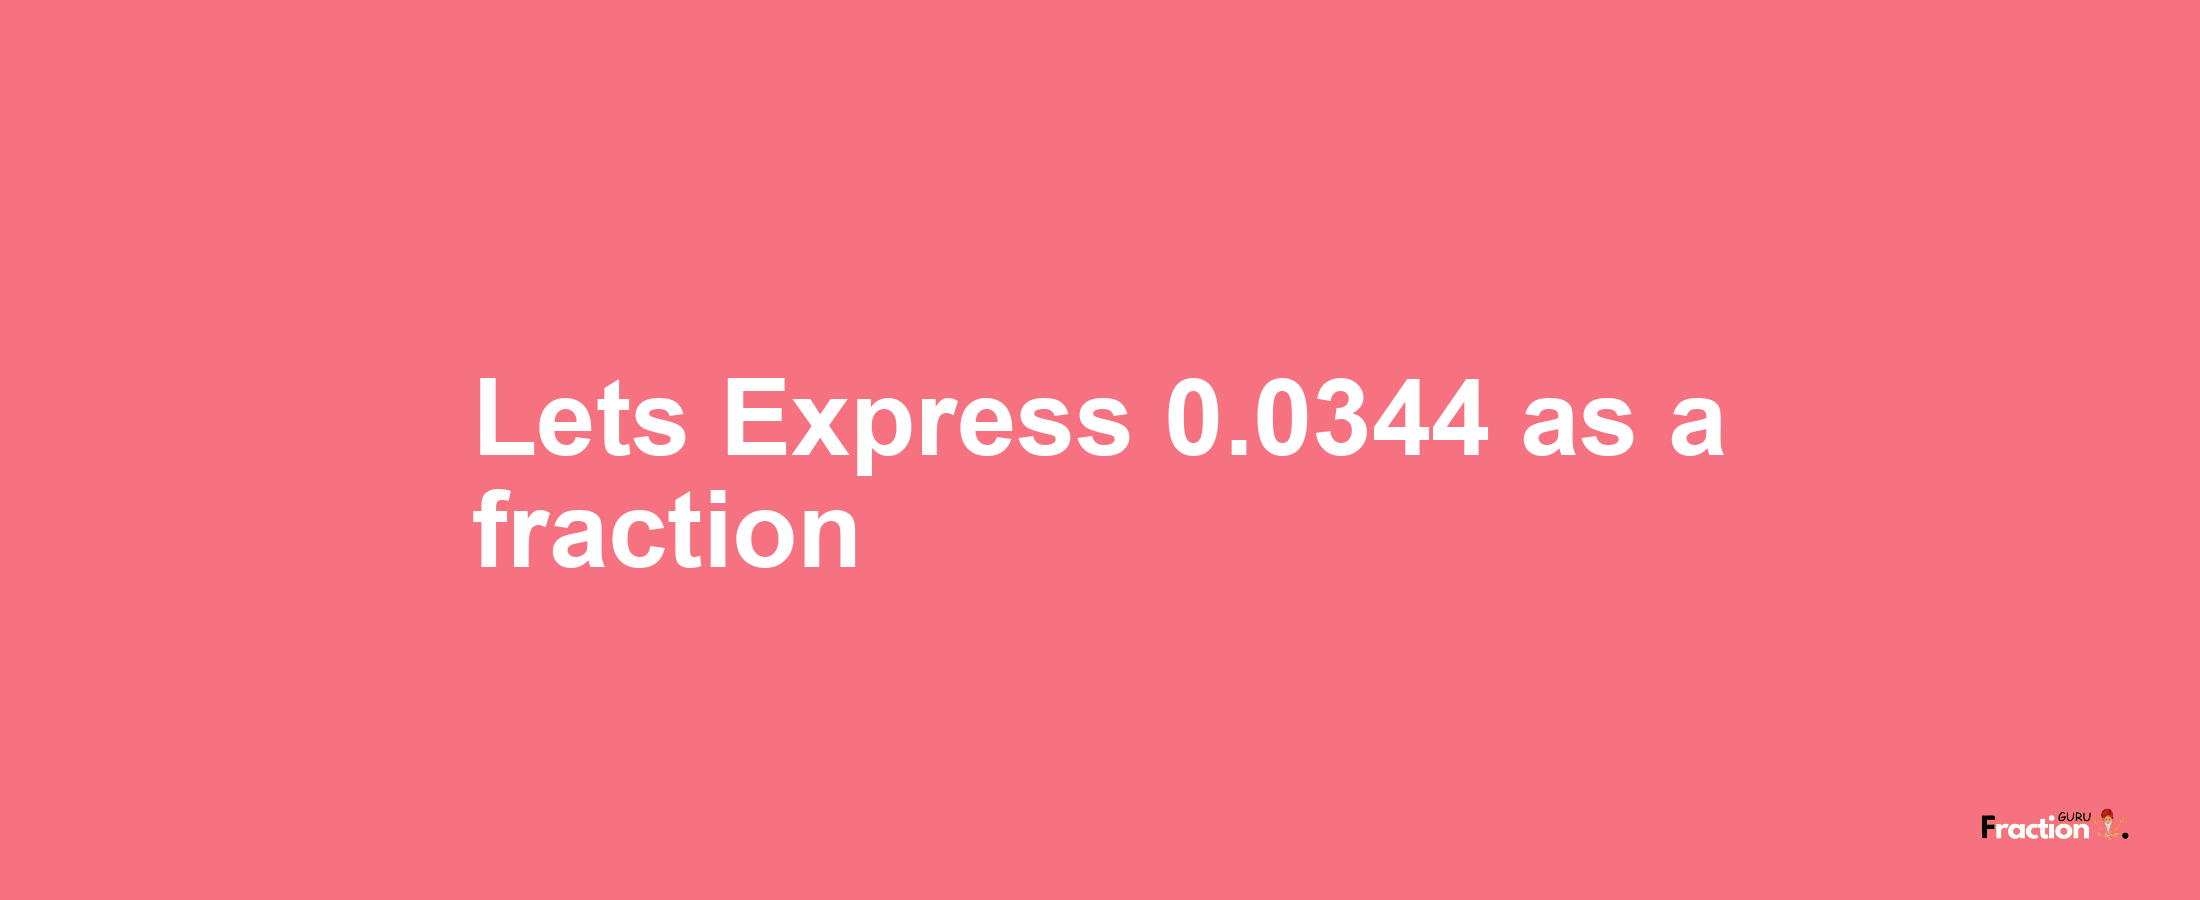 Lets Express 0.0344 as afraction